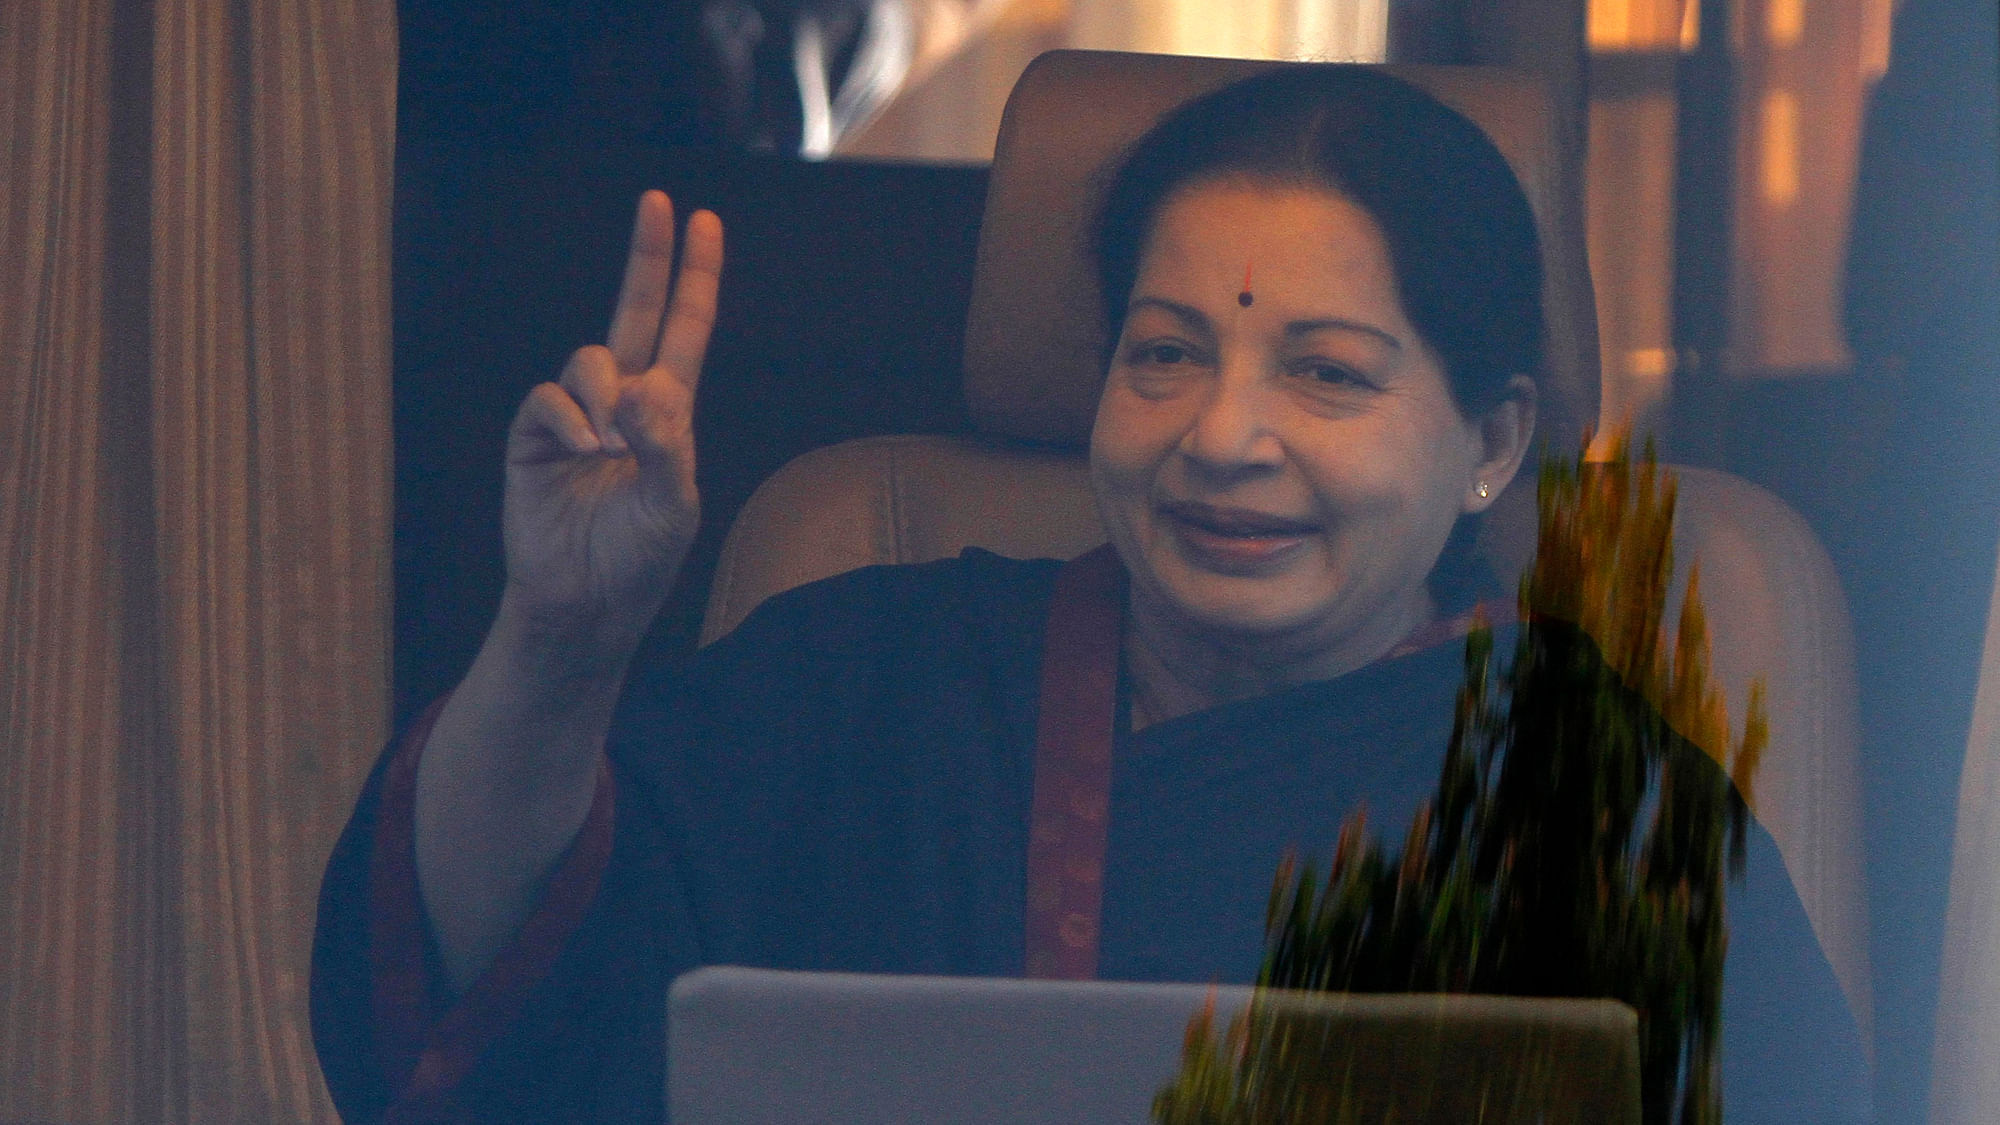 Tamil Nadu Chief Minister and AIADMK chief J Jayalalithaa has been hospitalised since September 22. (Photo: Reuters)